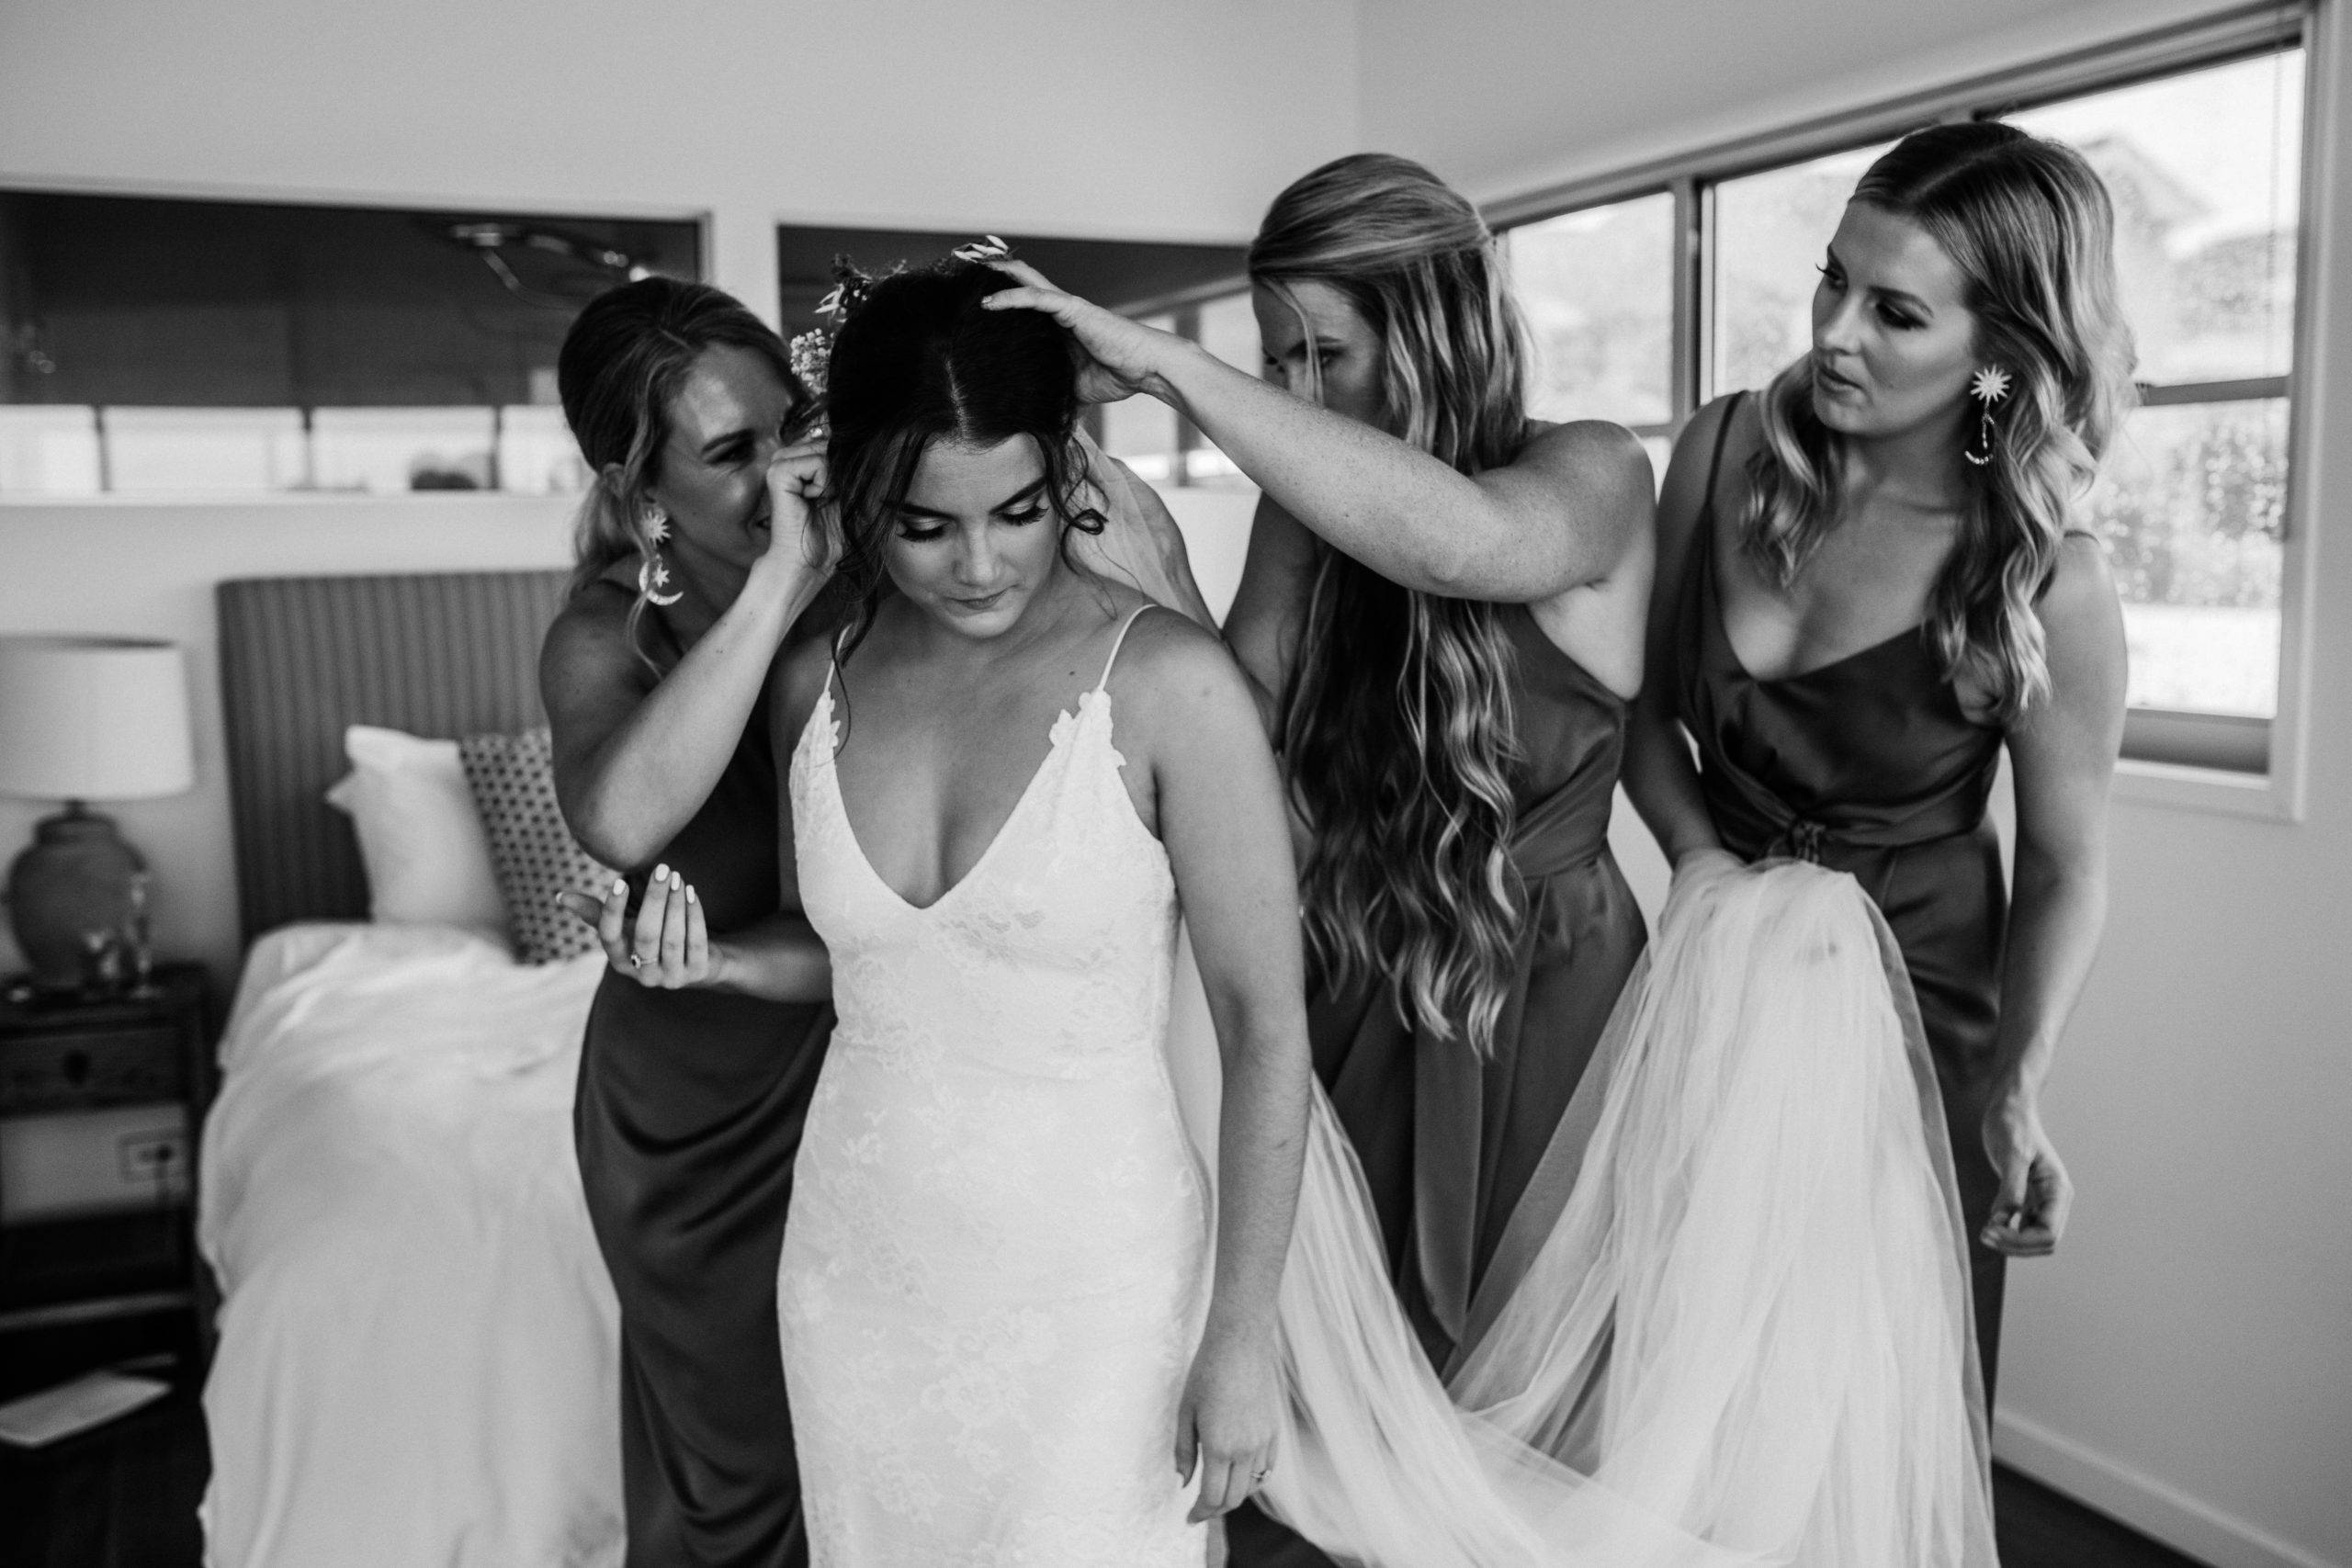 Bridal party fixing the brides hair wearing a white lace dress